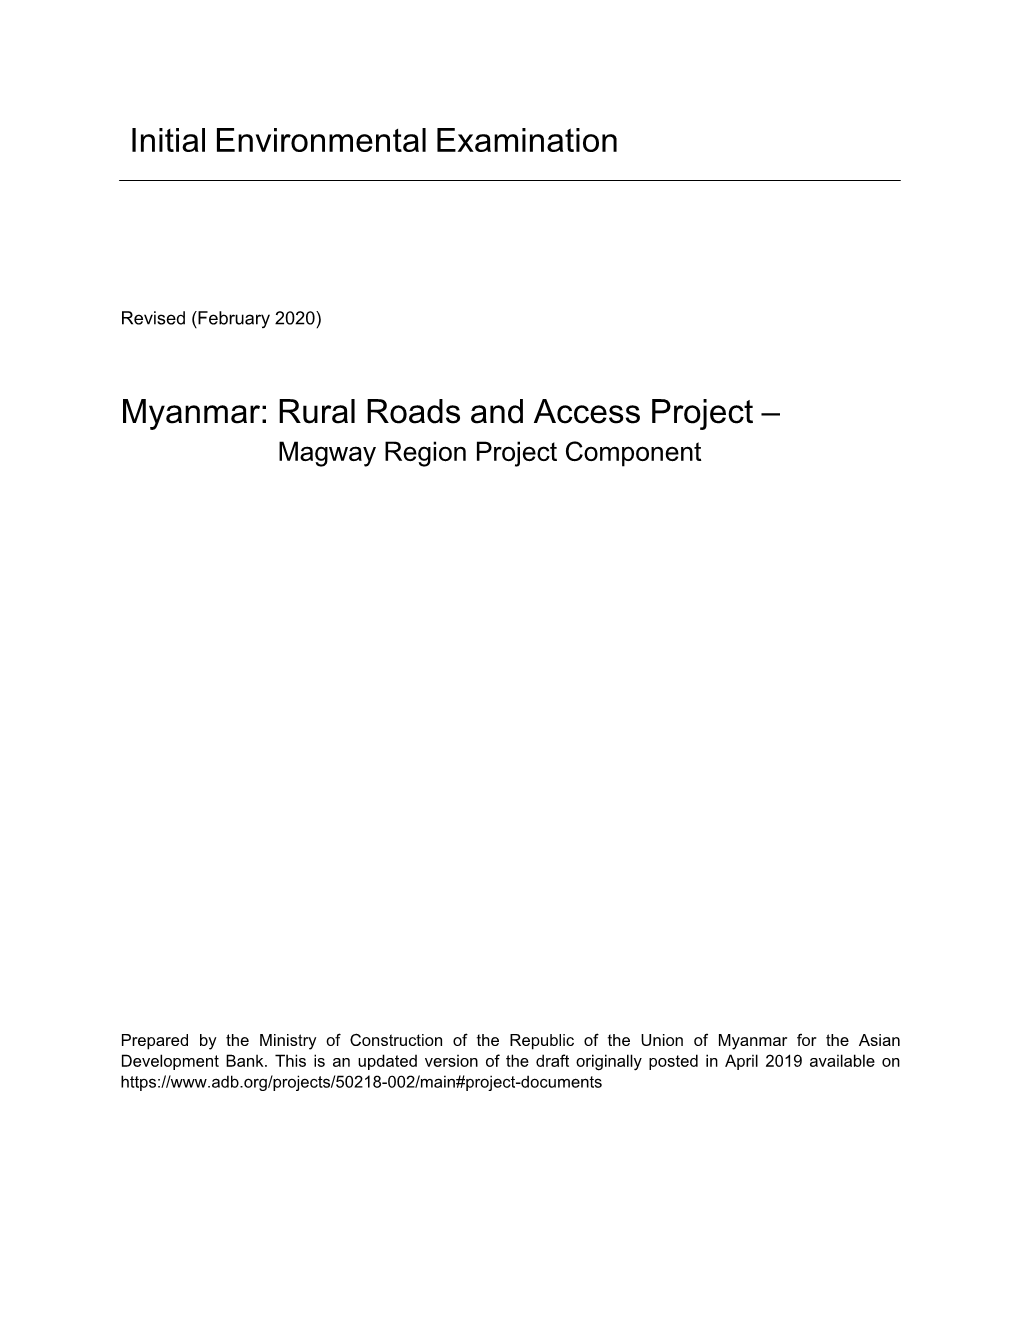 Rural Roads and Access Project – Magway Region Project Component